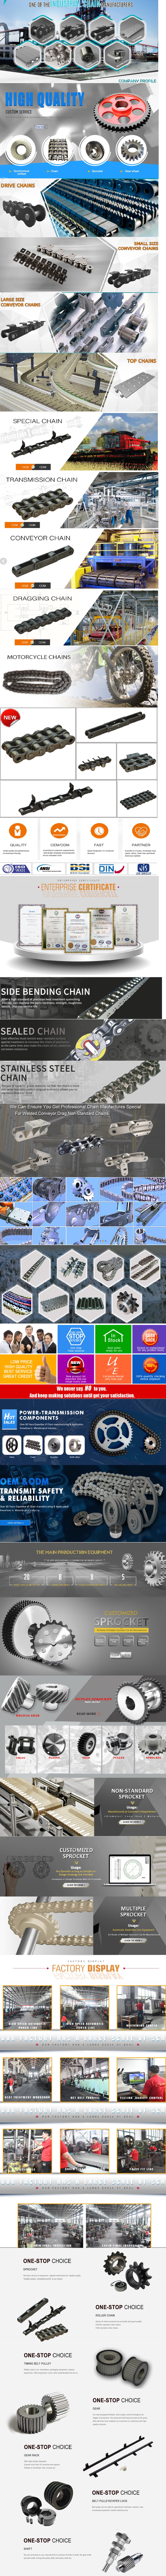 Best  made in China - replacement parts - Chain & sprocket manufacturer : High yfz450r chain roller  in Tyumen Russian Federation  Sensitivity Conveyor Belt Auto Rejector Packed Food Metal Detector with ce certificate top quality low price